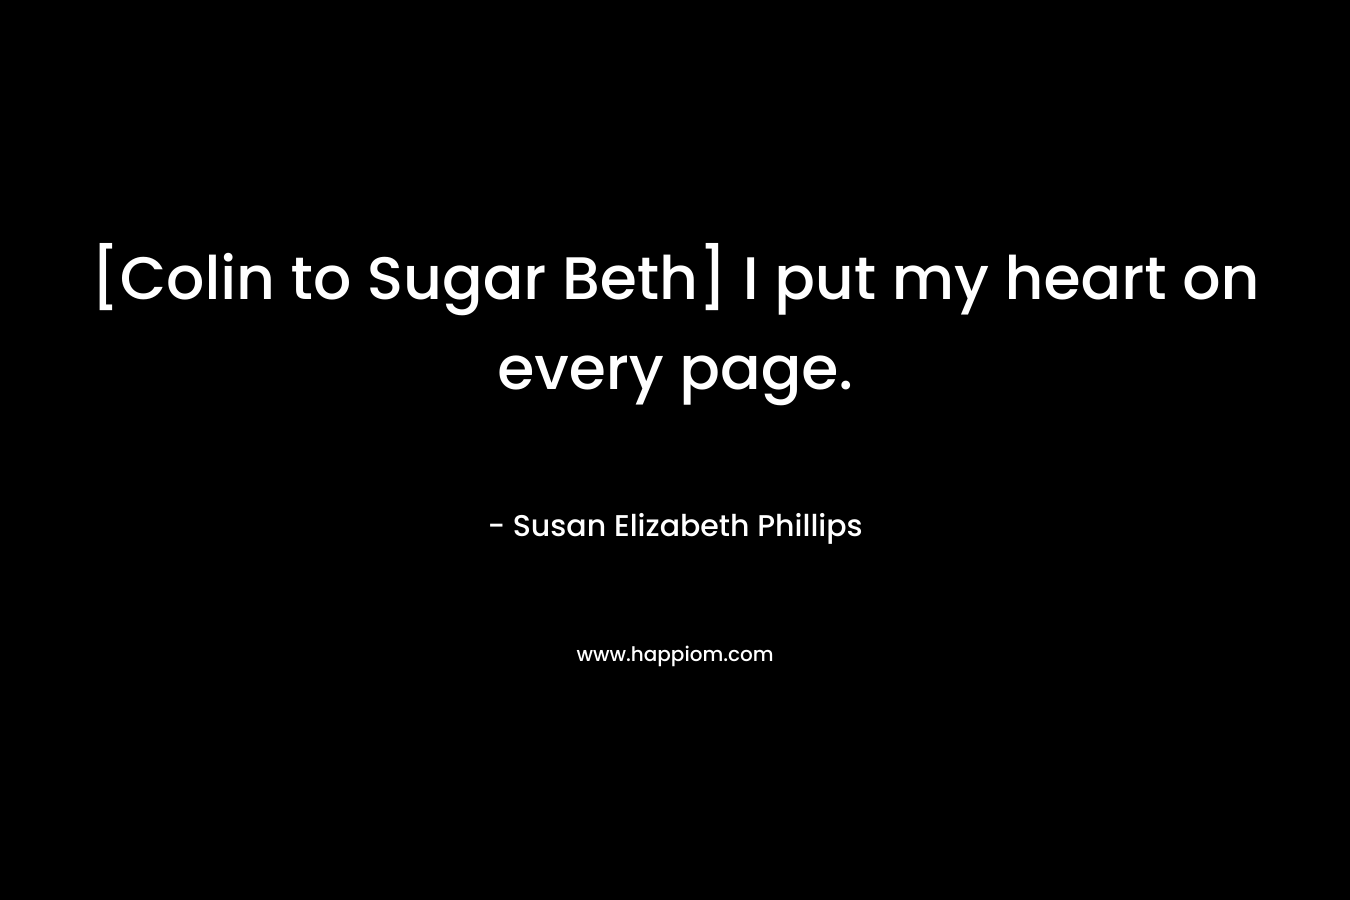 [Colin to Sugar Beth] I put my heart on every page.